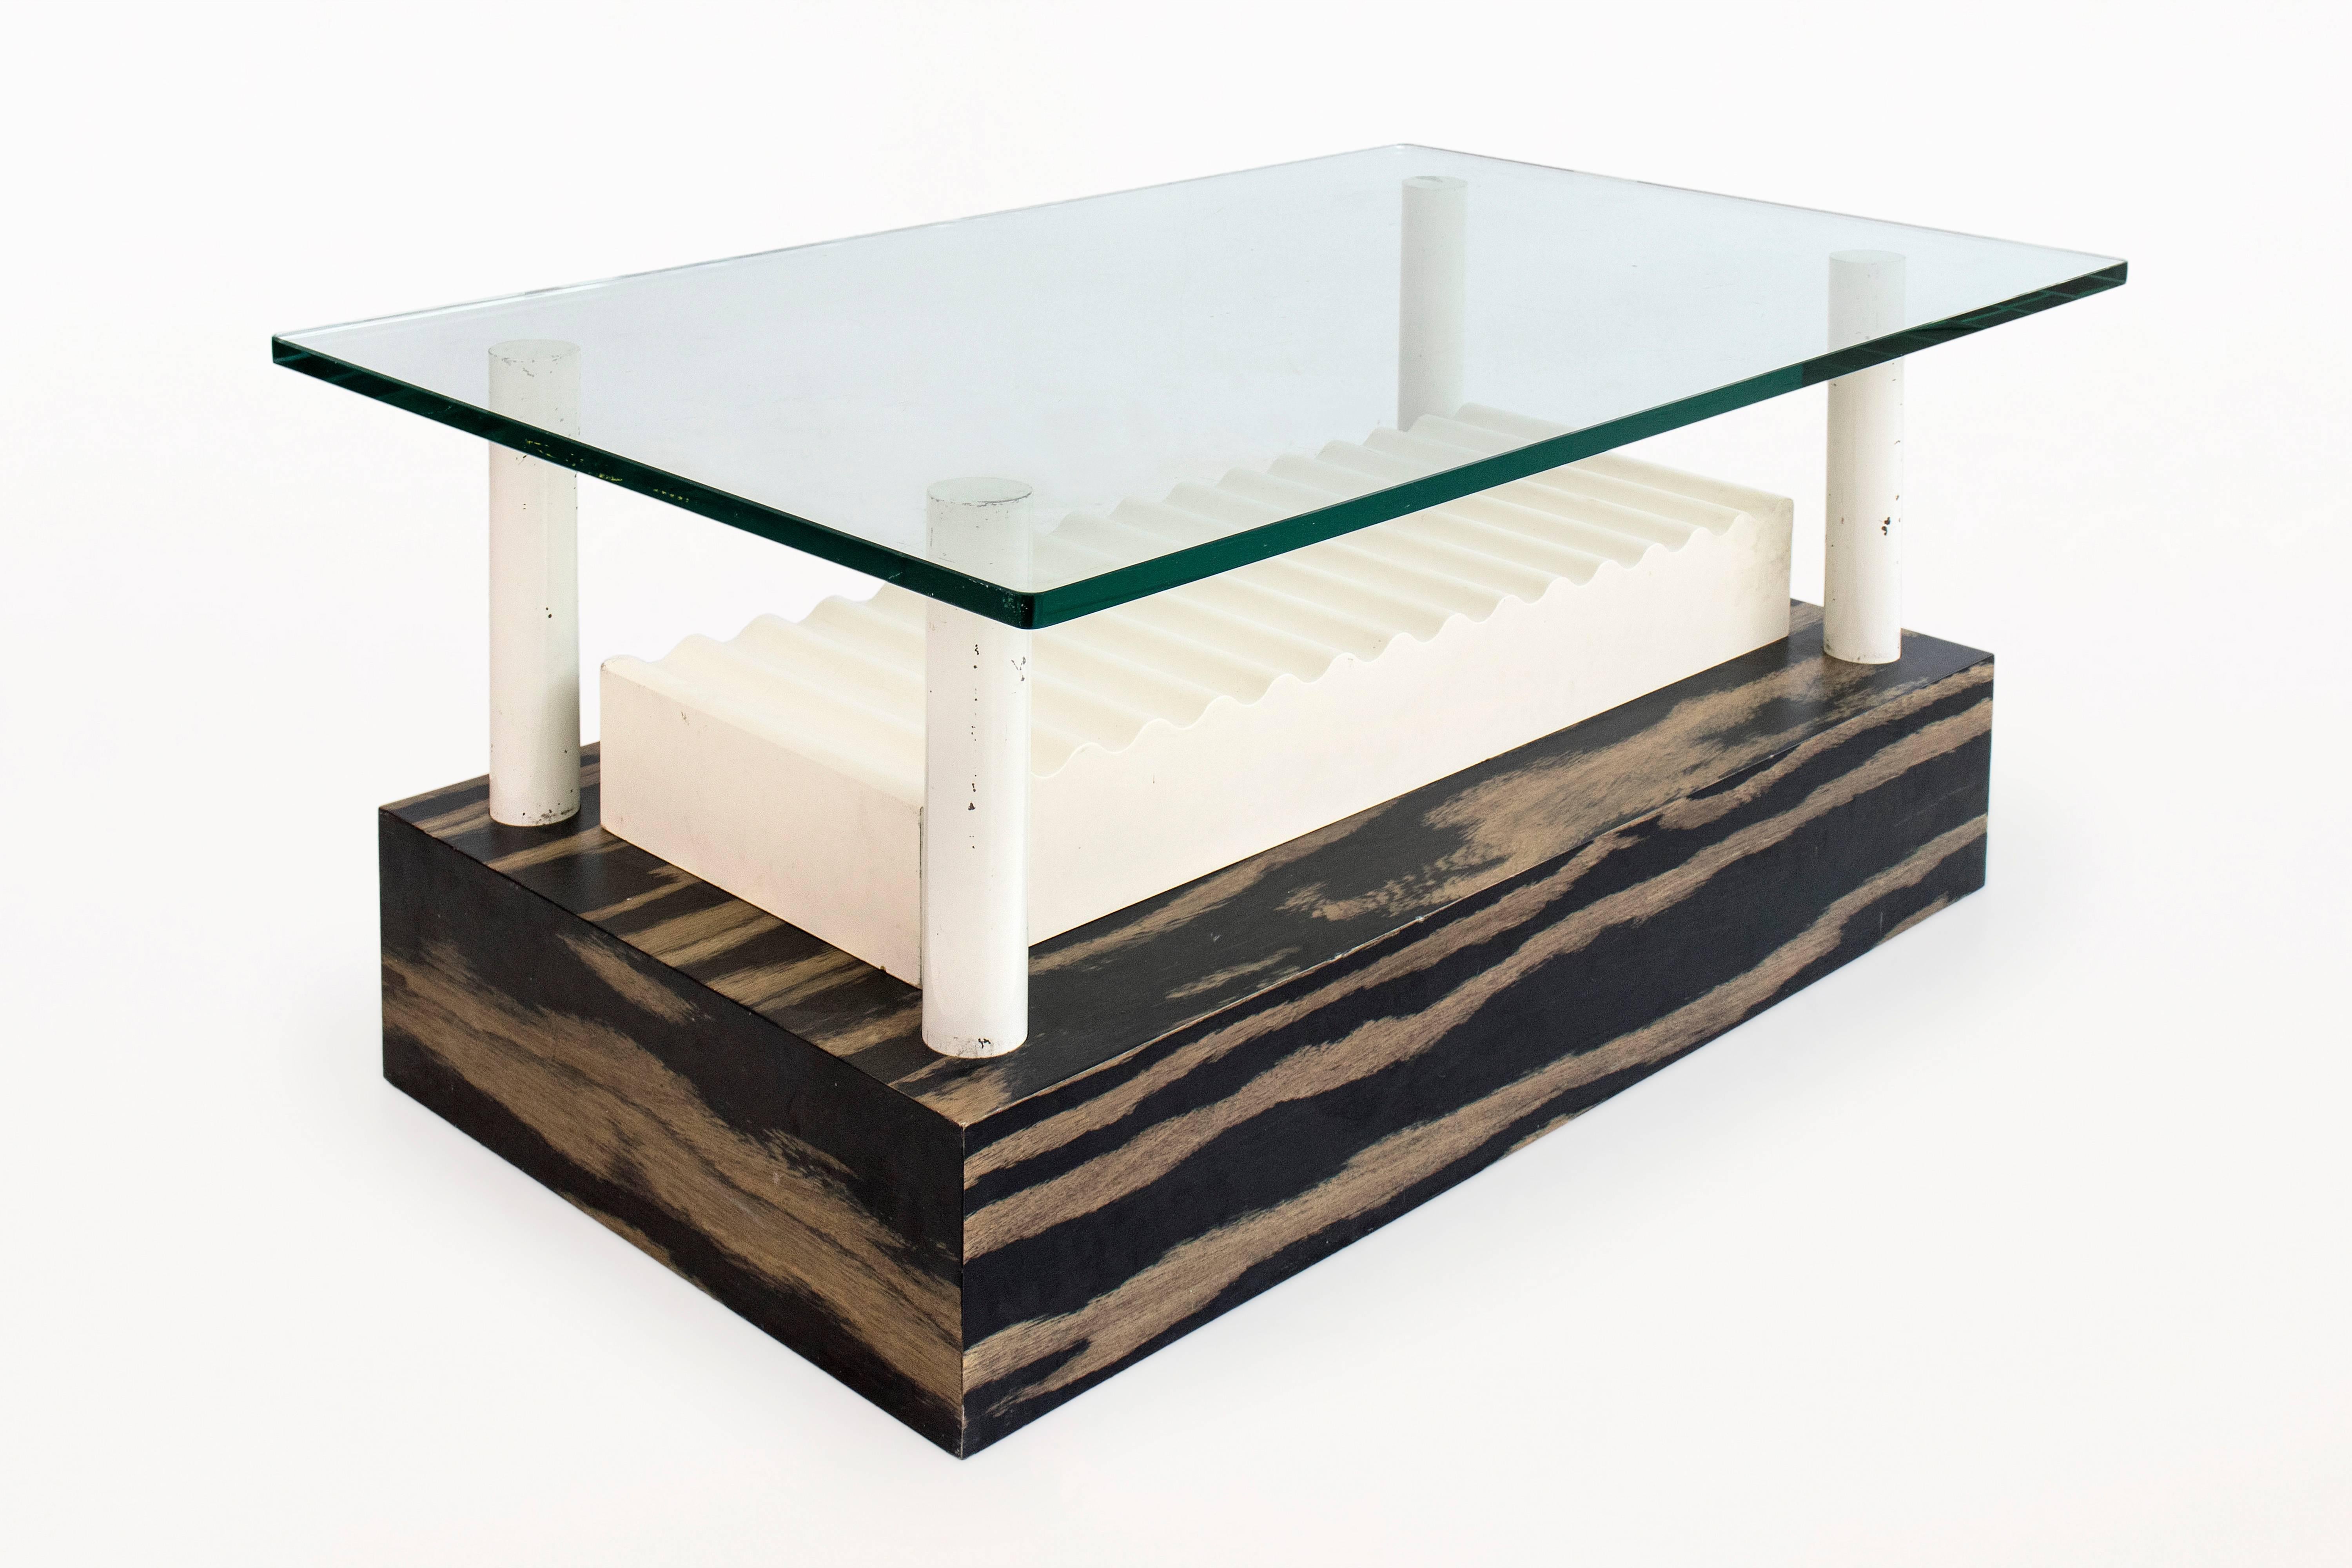 Memphis Milano coffee table by Ettore Sottsass for Alessi
unique, one-of-a-kind
Designed by Sottsass for Alessi
glass top suspended by 4 lacquered metal columns positioned in a laminated wooden base with figurative wave center piece
Provenance: